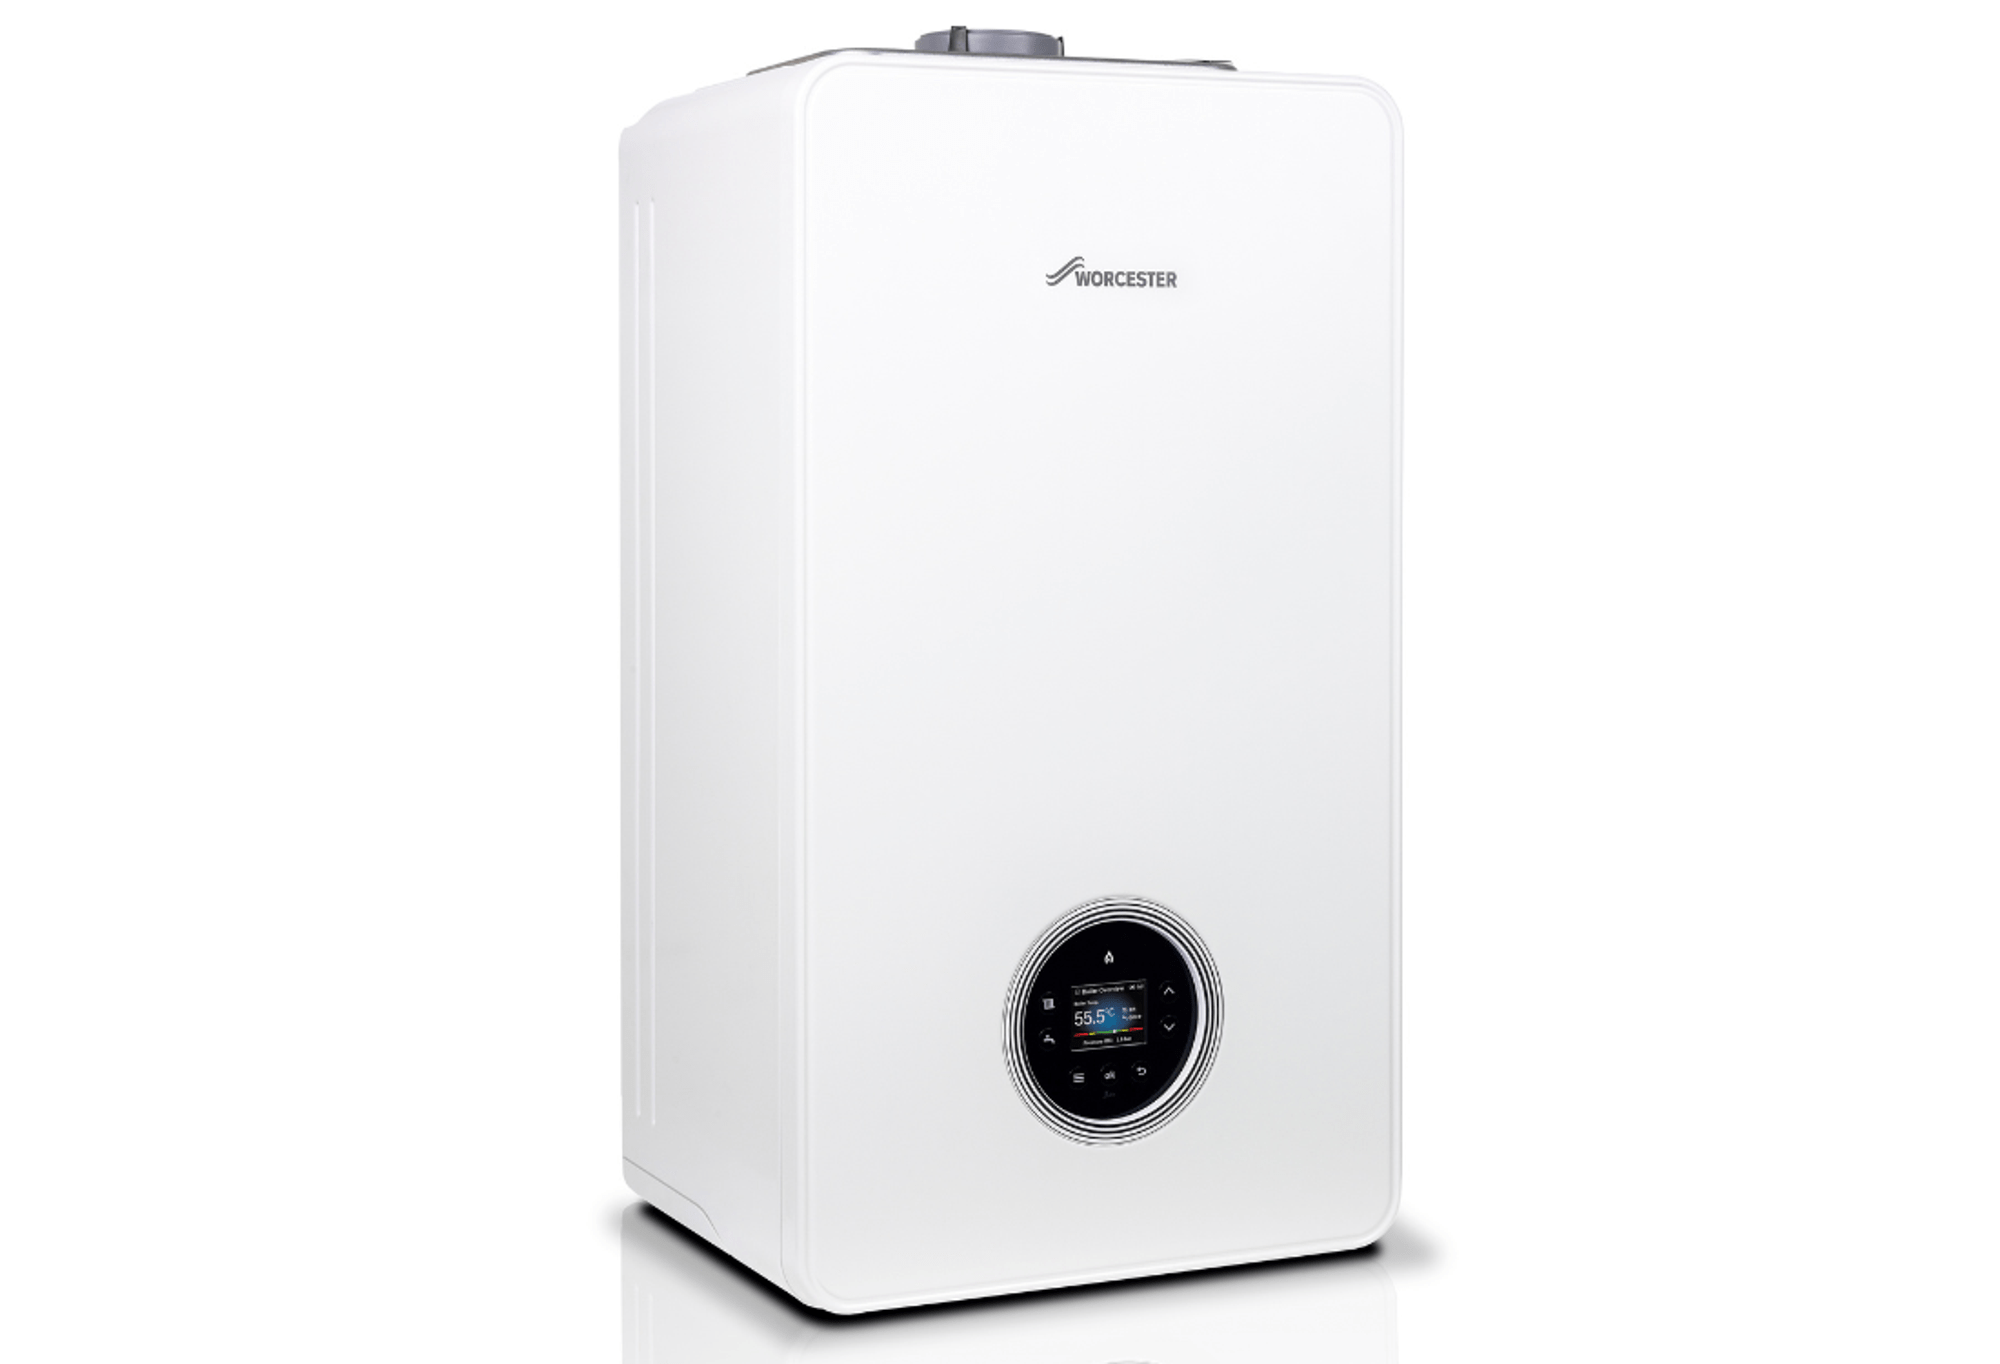 A boiler from Nicholson Heating Services, that undergoes service and maintenance regularly to ensure its performance.